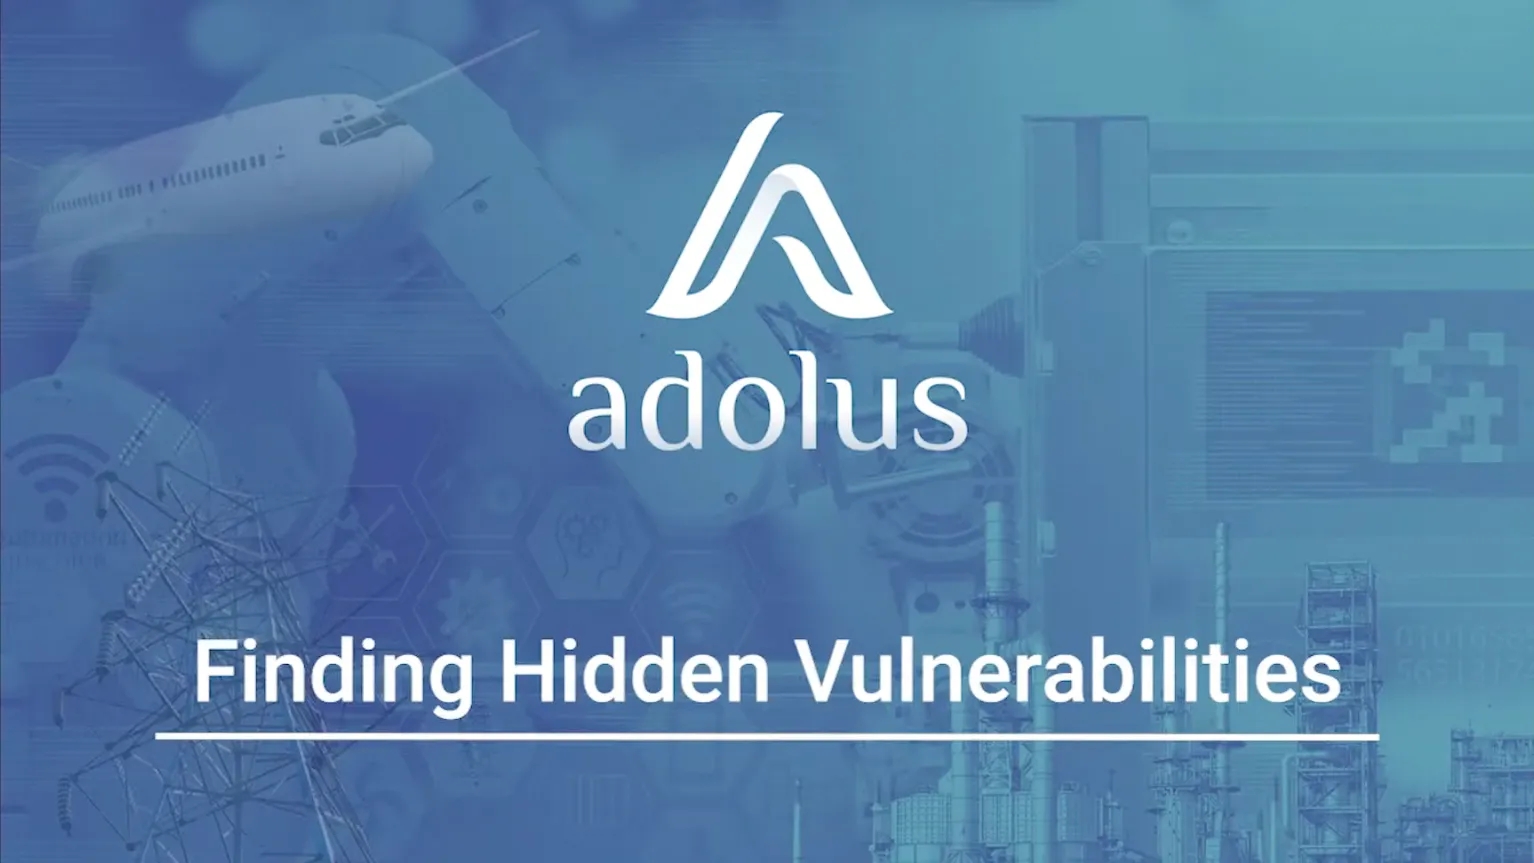 Text Thumbnail for our video on Finding Hidden Vulnerabilities